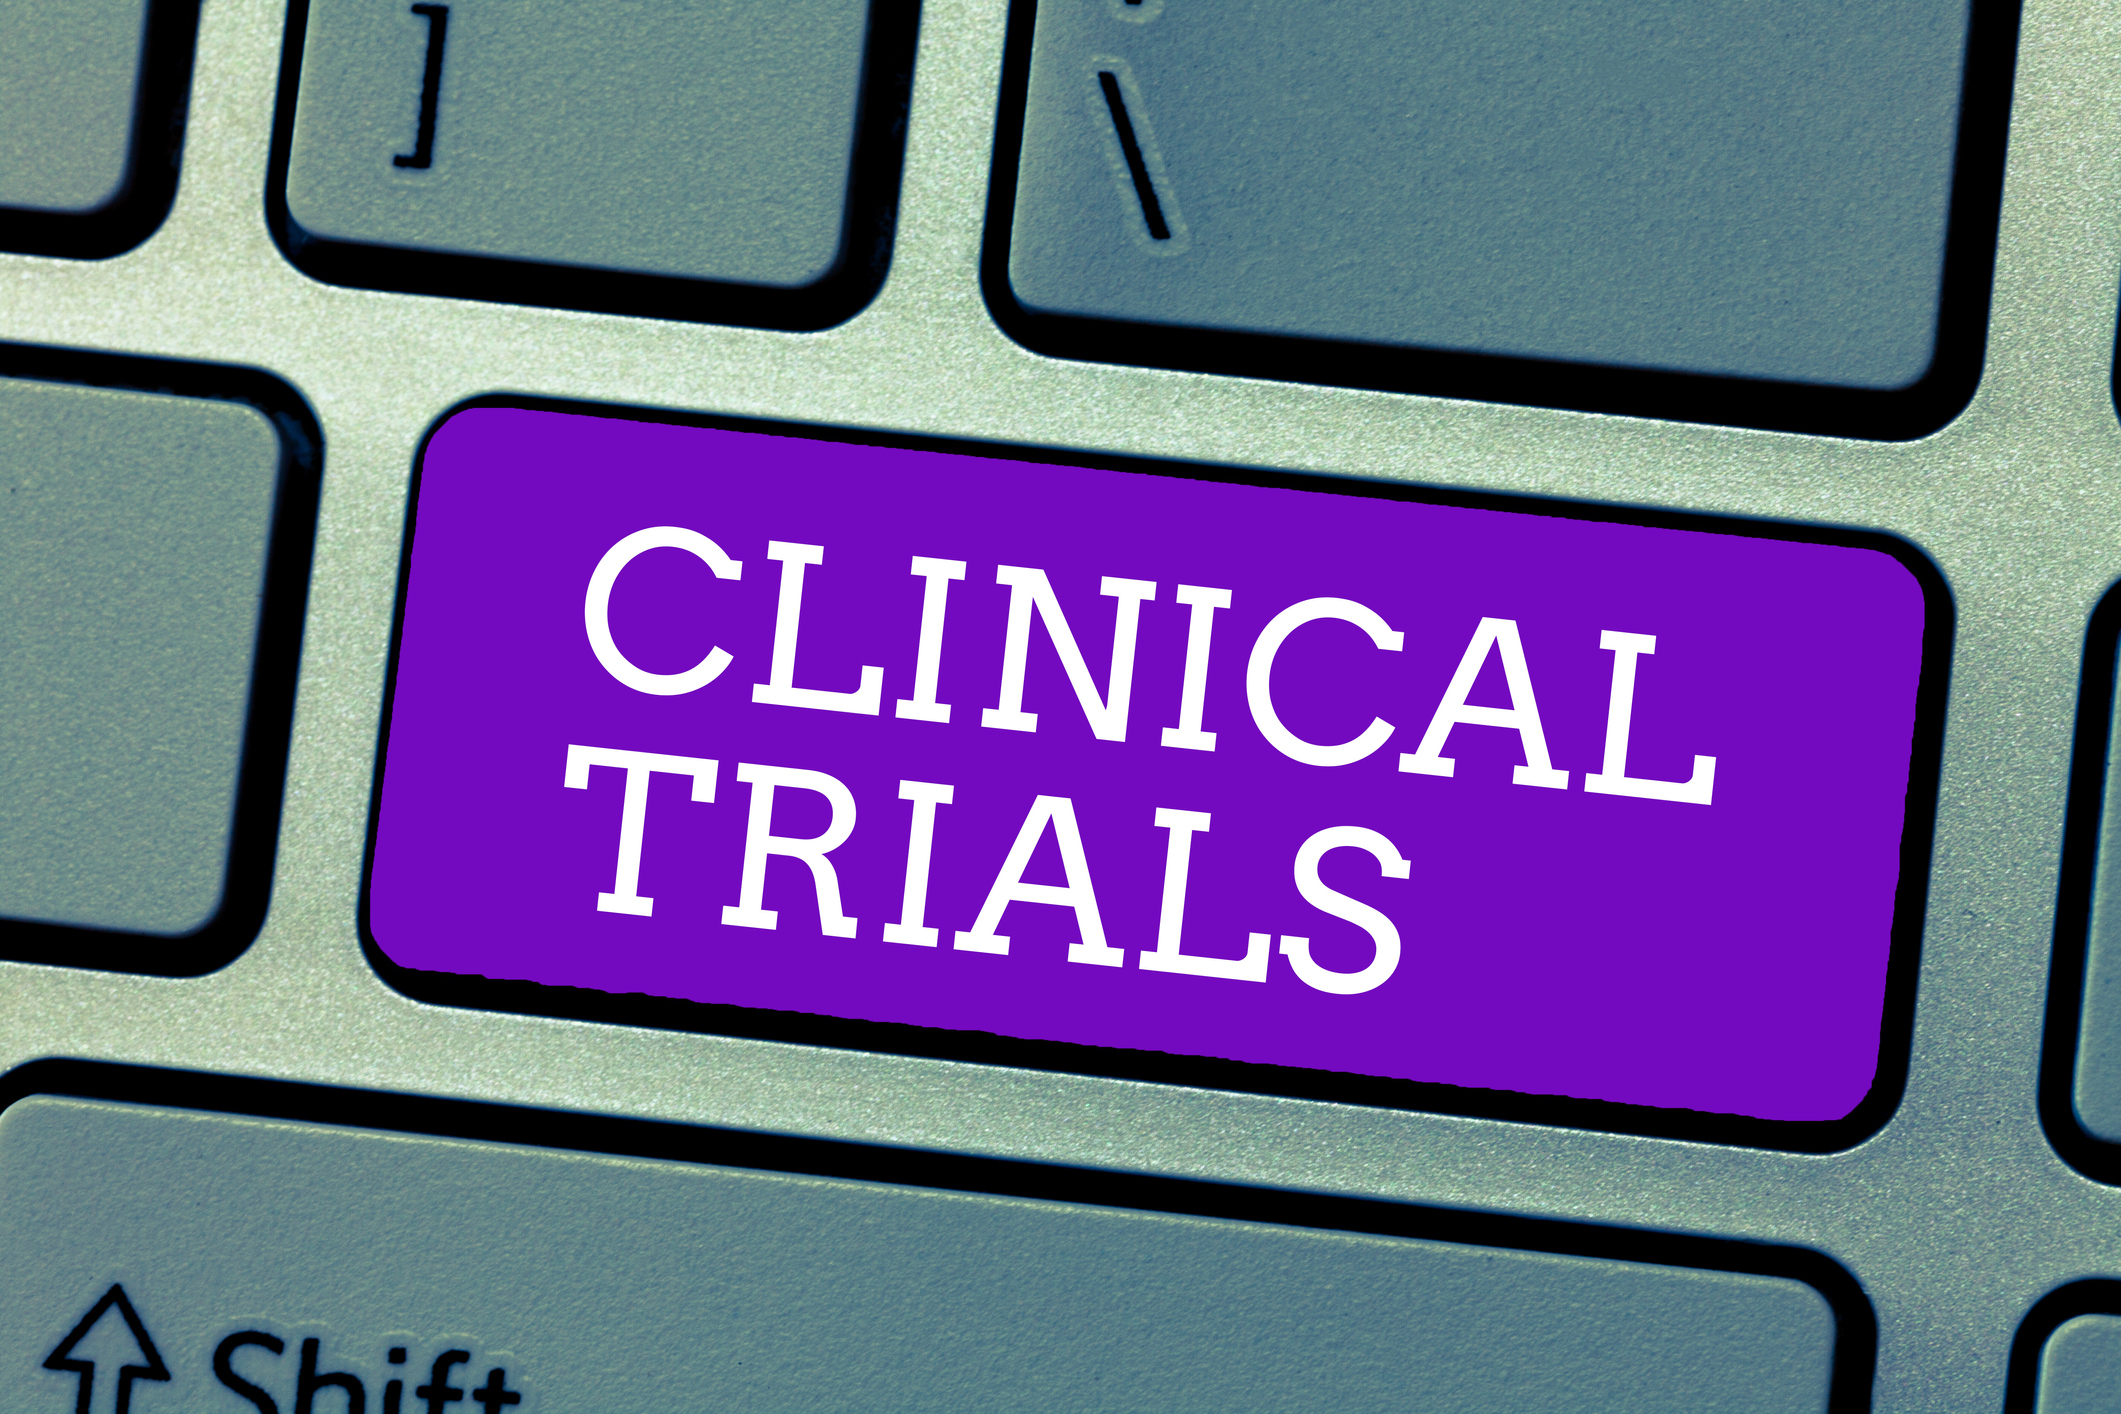 Inato unveils trial matching tool claiming greater efficiency